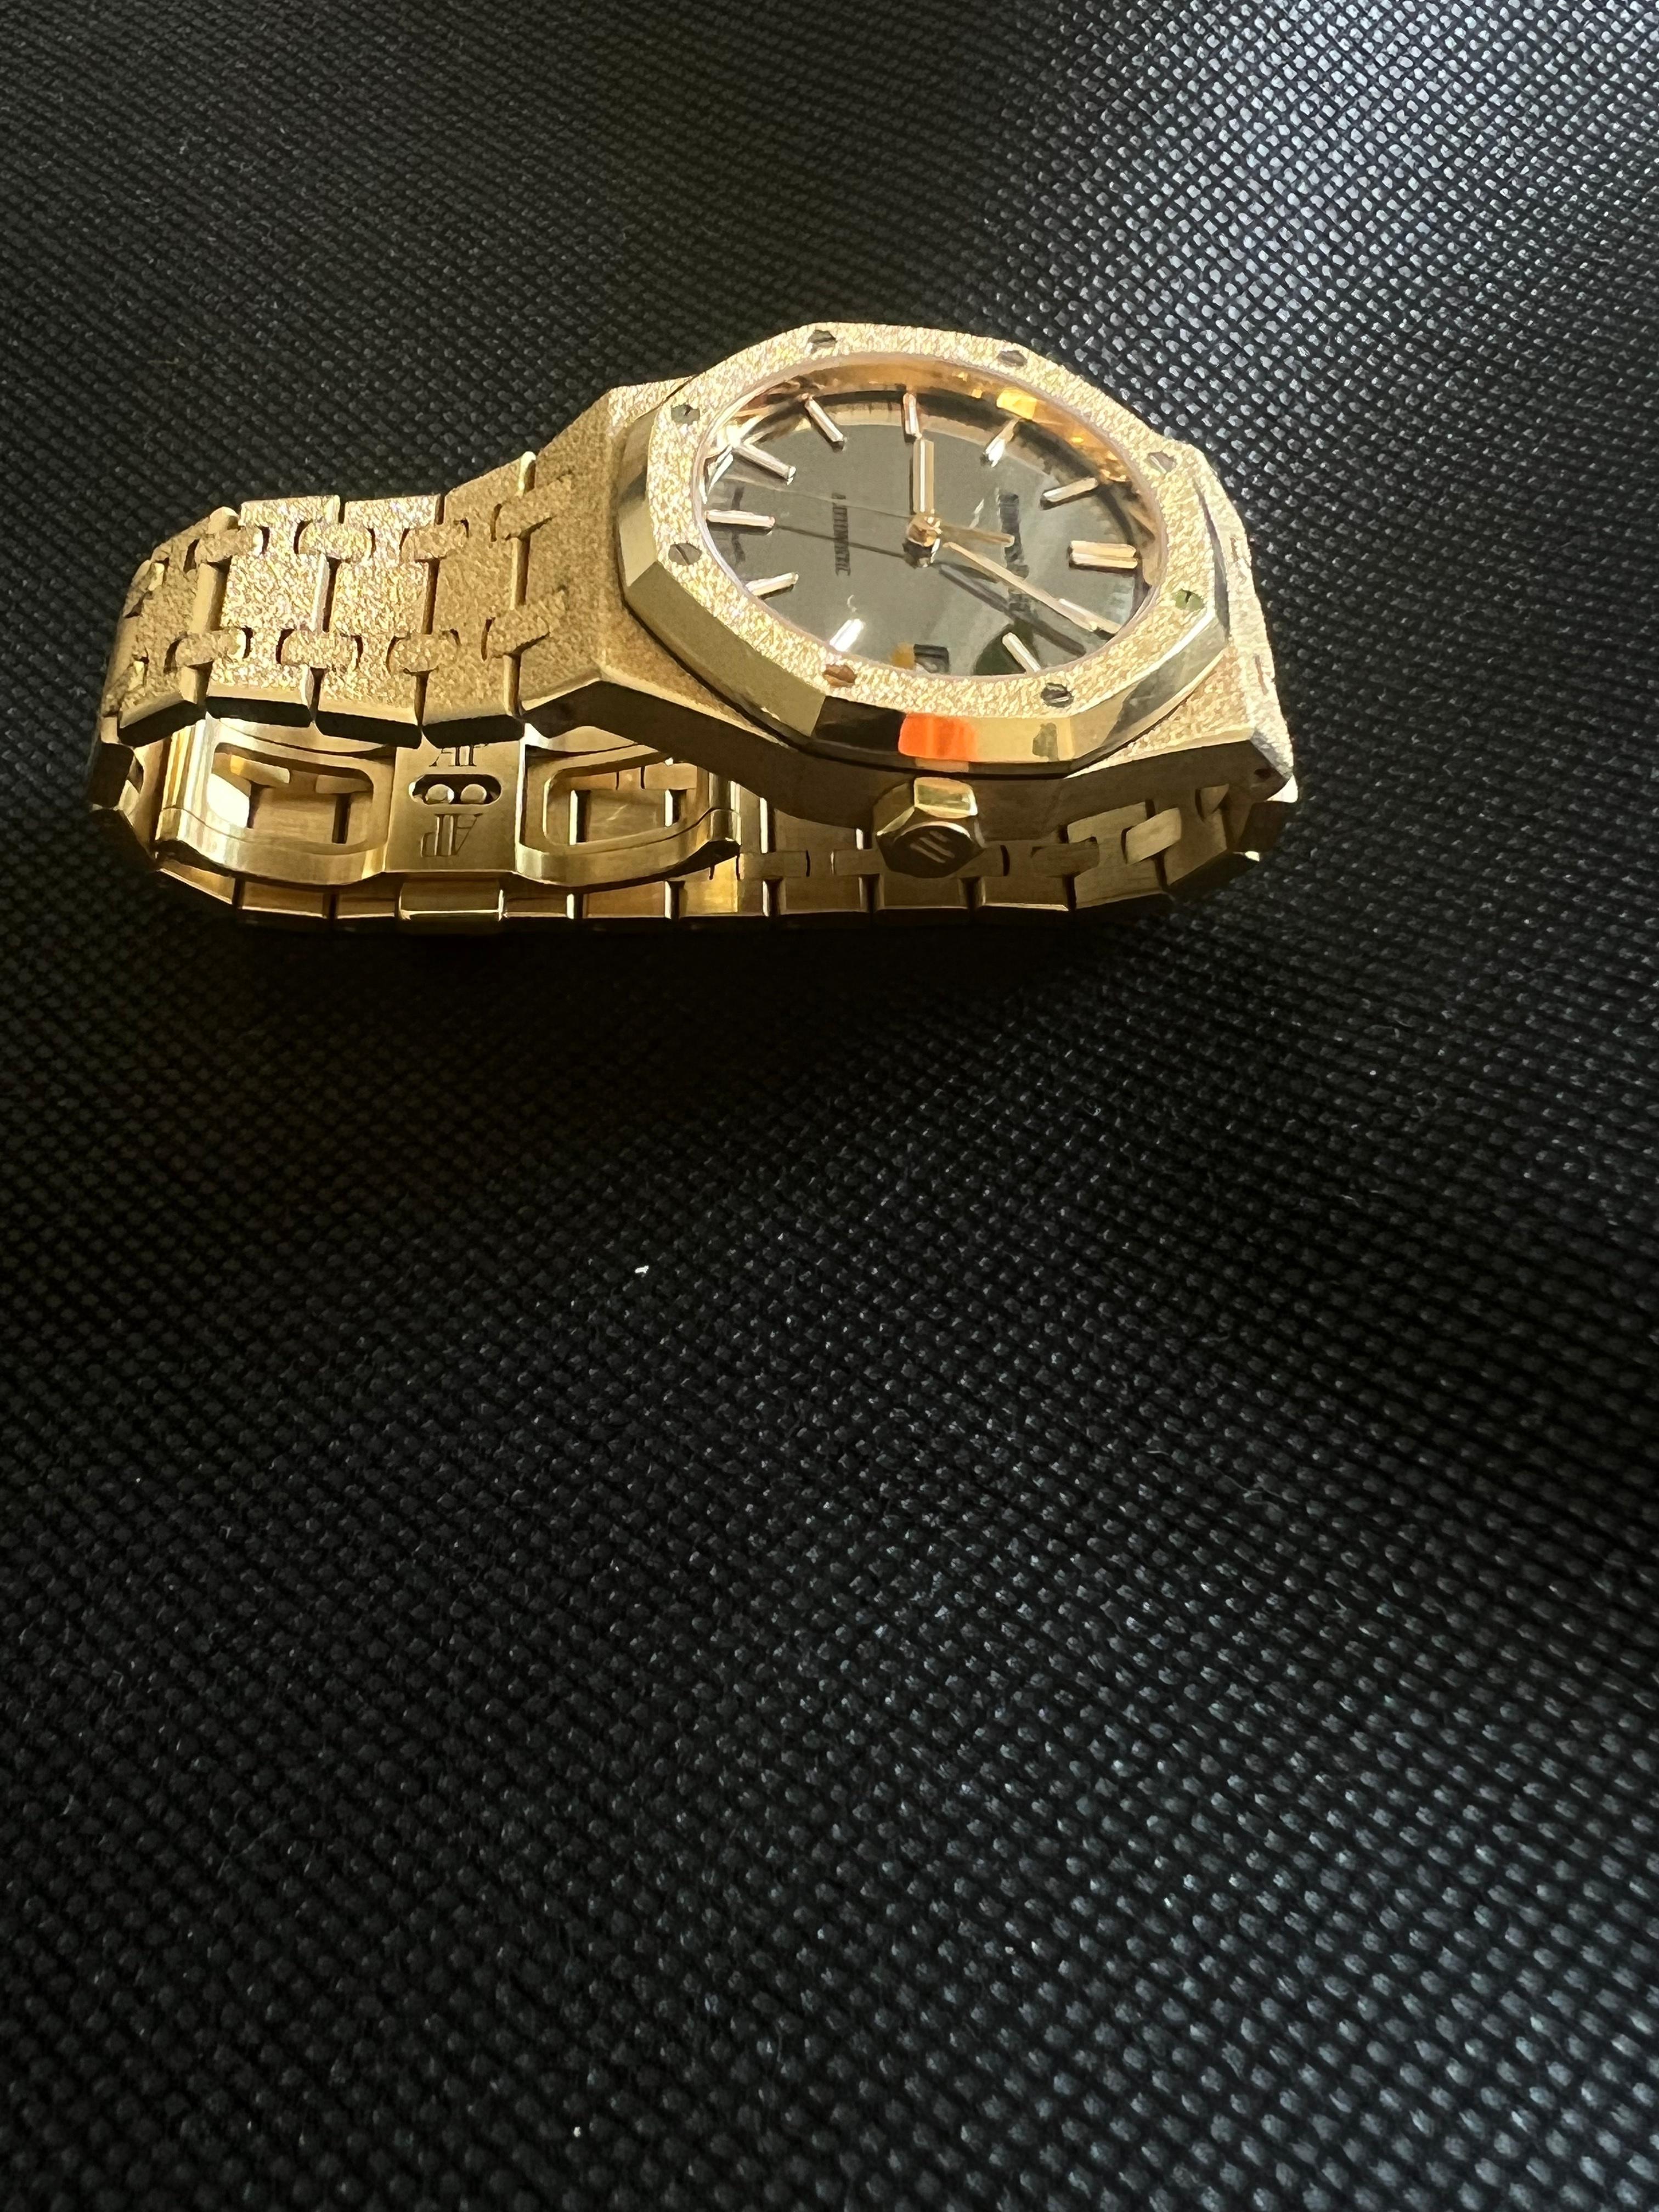 Audemars Piguet Gold Ap Limited Edition Royal Oak By Carolina Bucci Watch In Excellent Condition For Sale In Los Angeles, CA